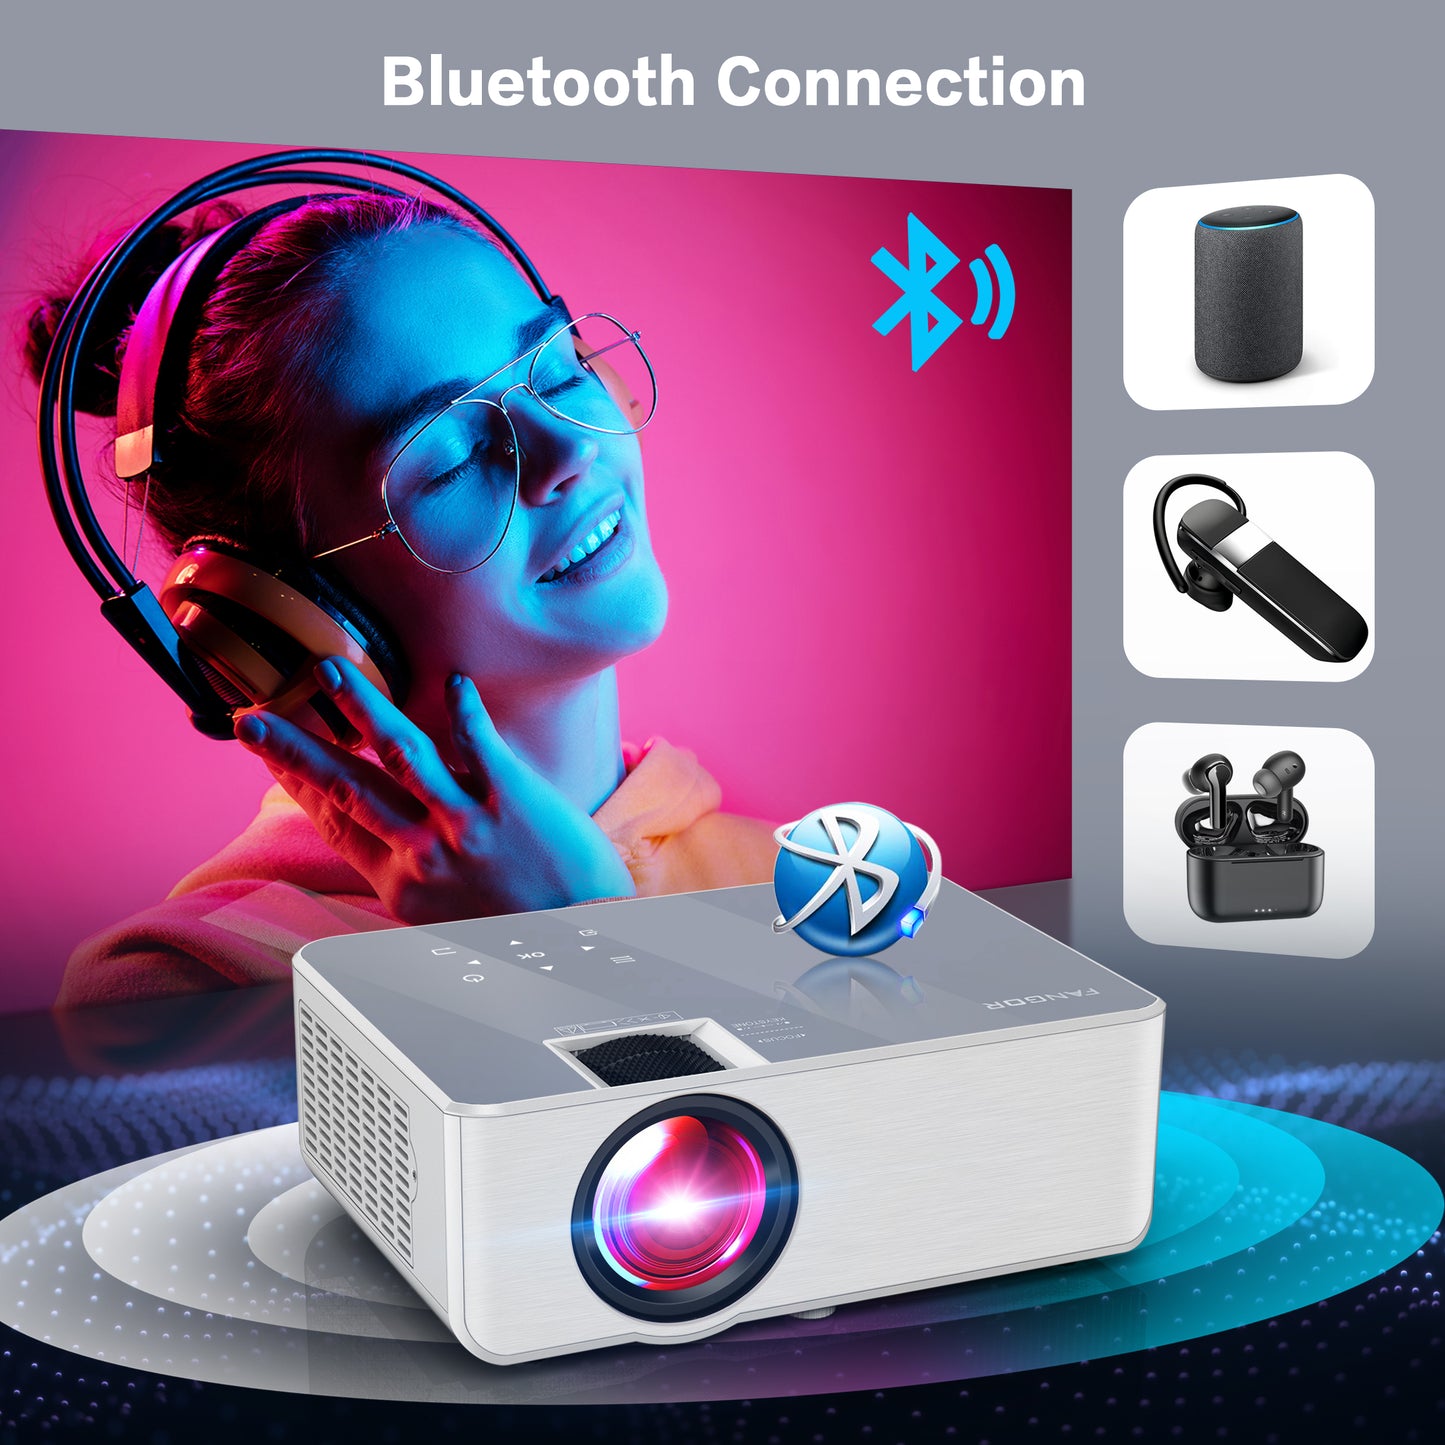 1080P HD Projector, WiFi Projector Bluetooth Projector, FANGOR 230" Portable Movie Projector with Tripod, Home Theater Video Projector Compatible with HDMI, VGA, USB, Laptop, iOS & Android Smartphone